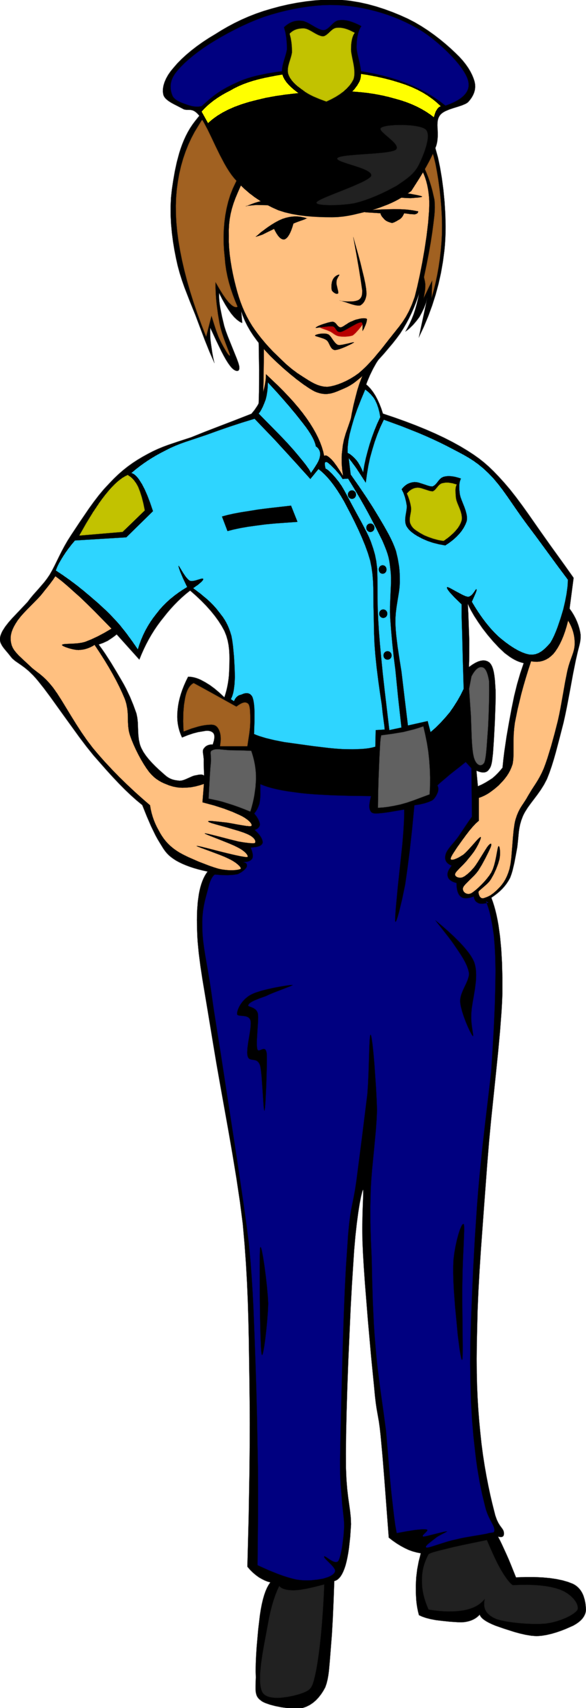 Arresting panda free images. Handcuff clipart police officer